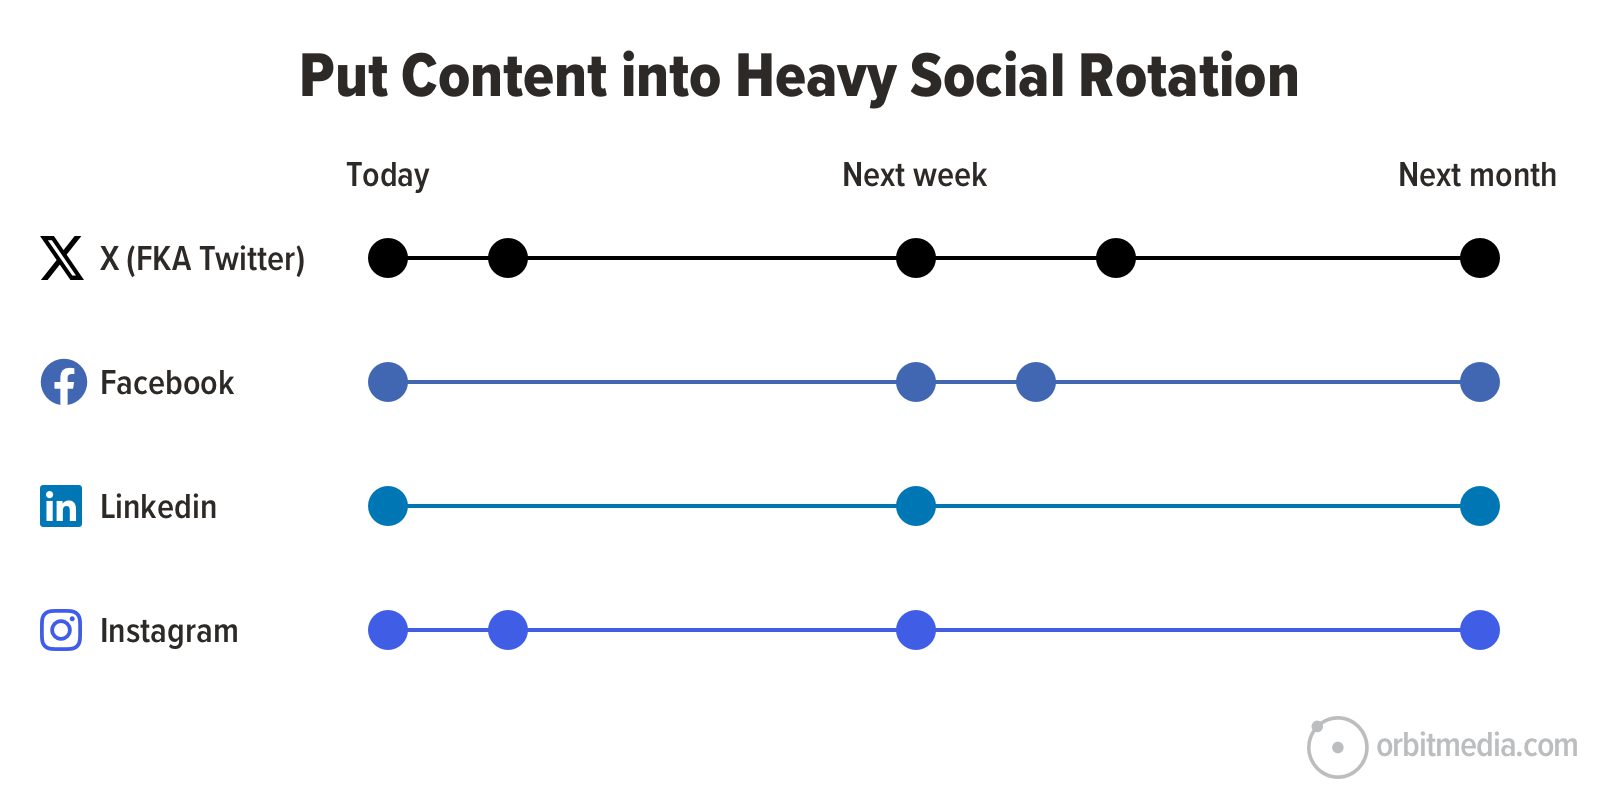 Timeline graphic showing content scheduling for x, facebook, linkedin, and instagram 